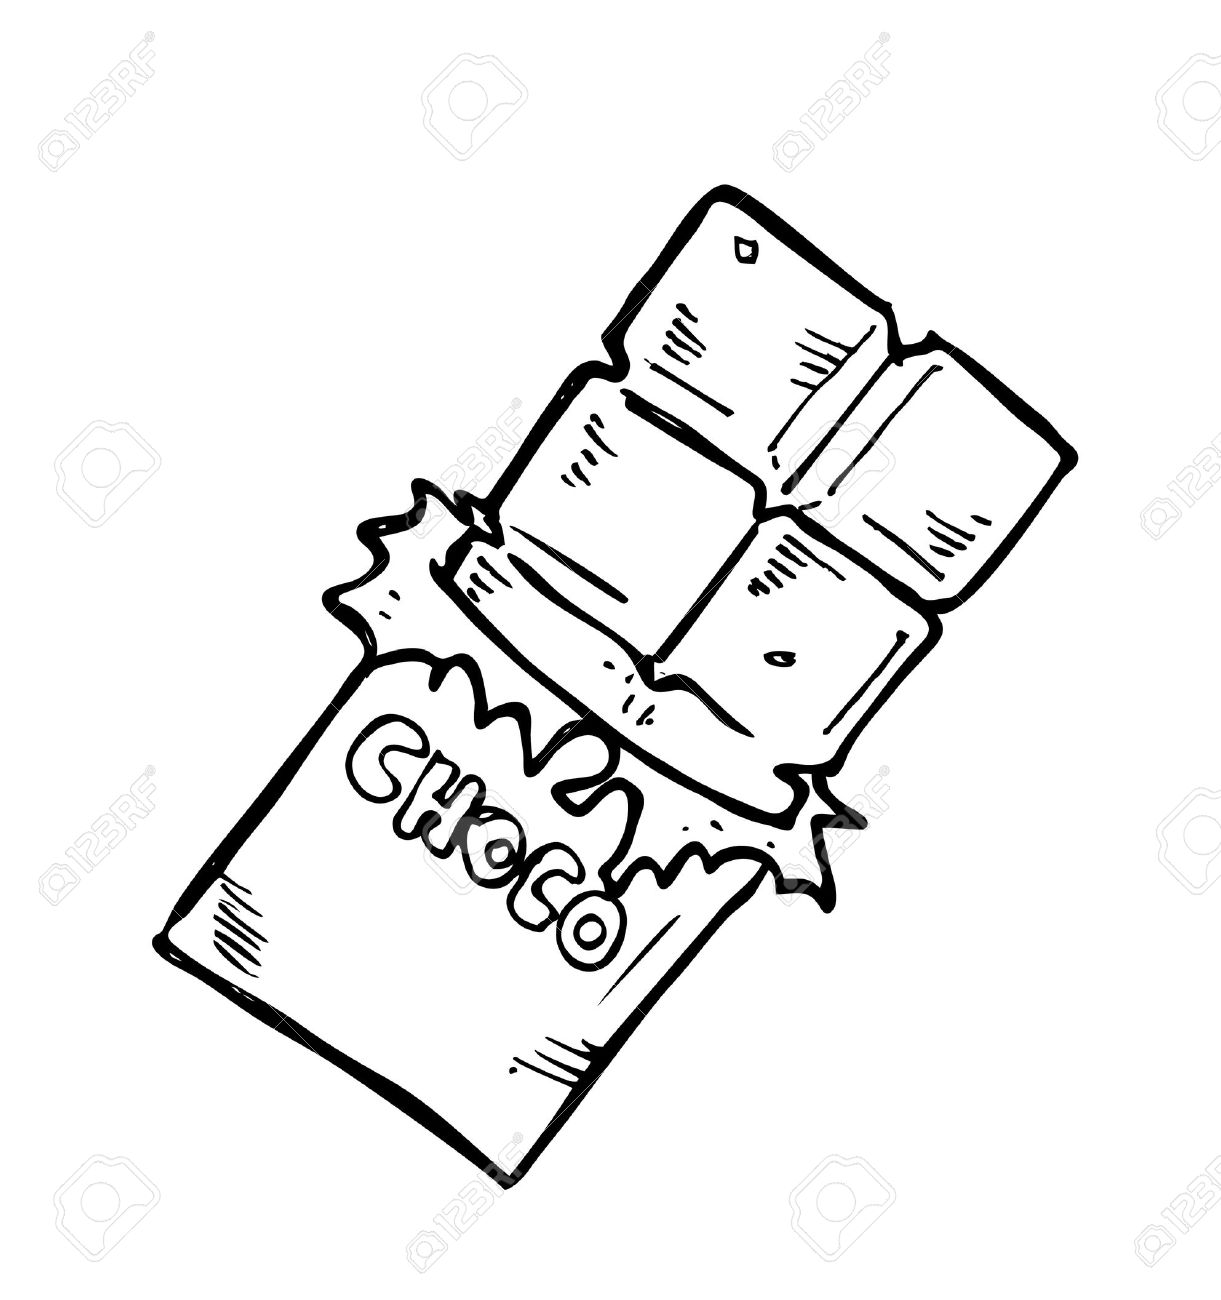 Chocolate bar clipart black and white